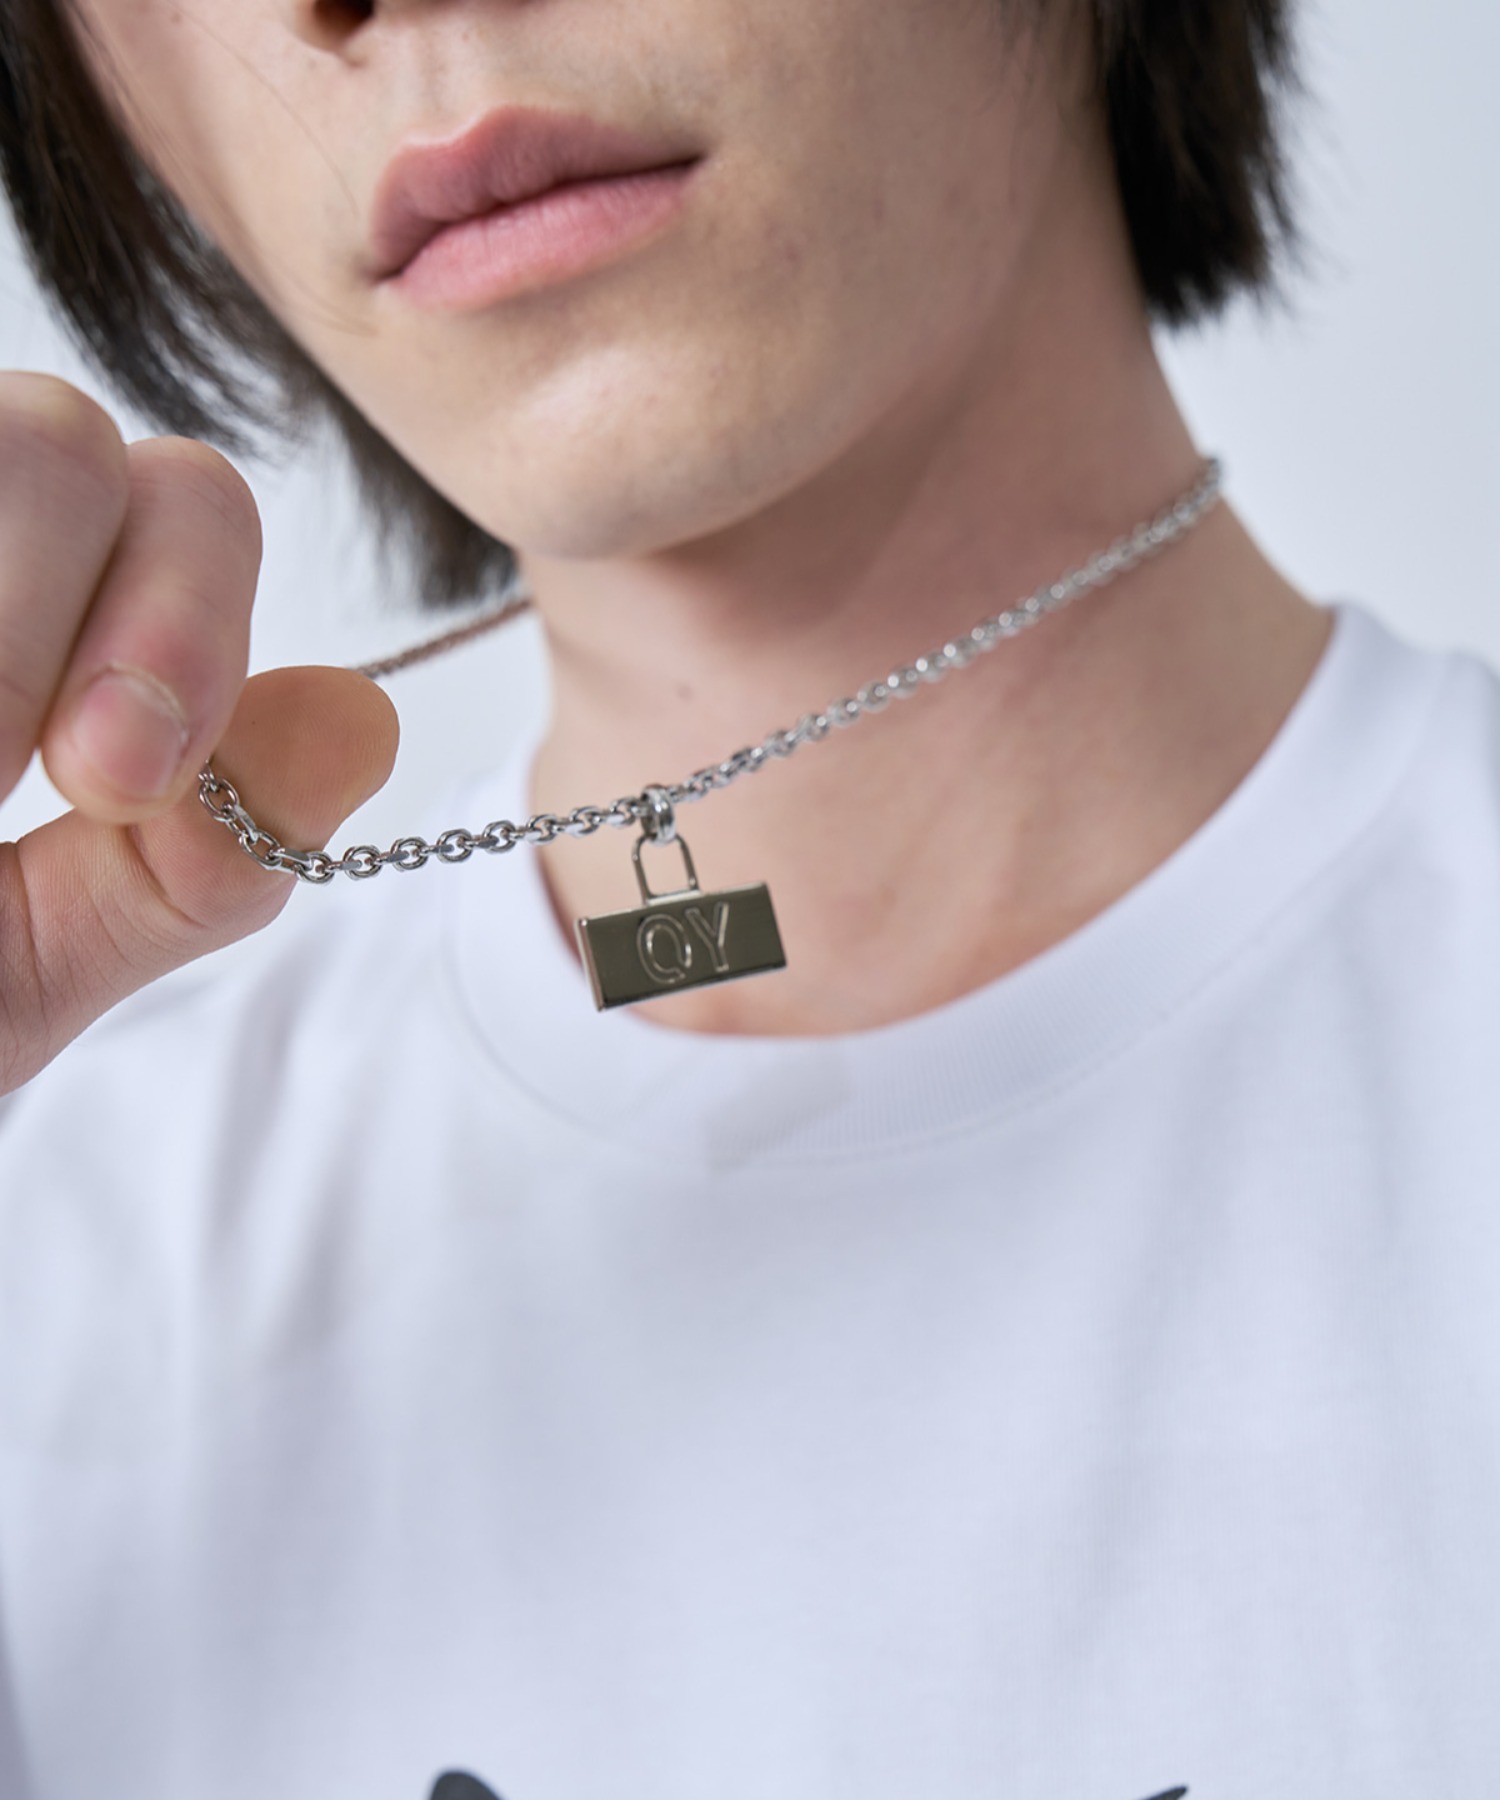 OY/オーワイ』SQUARE LOGO NECKLACE/スクウェアロゴネックレス OY│A ...